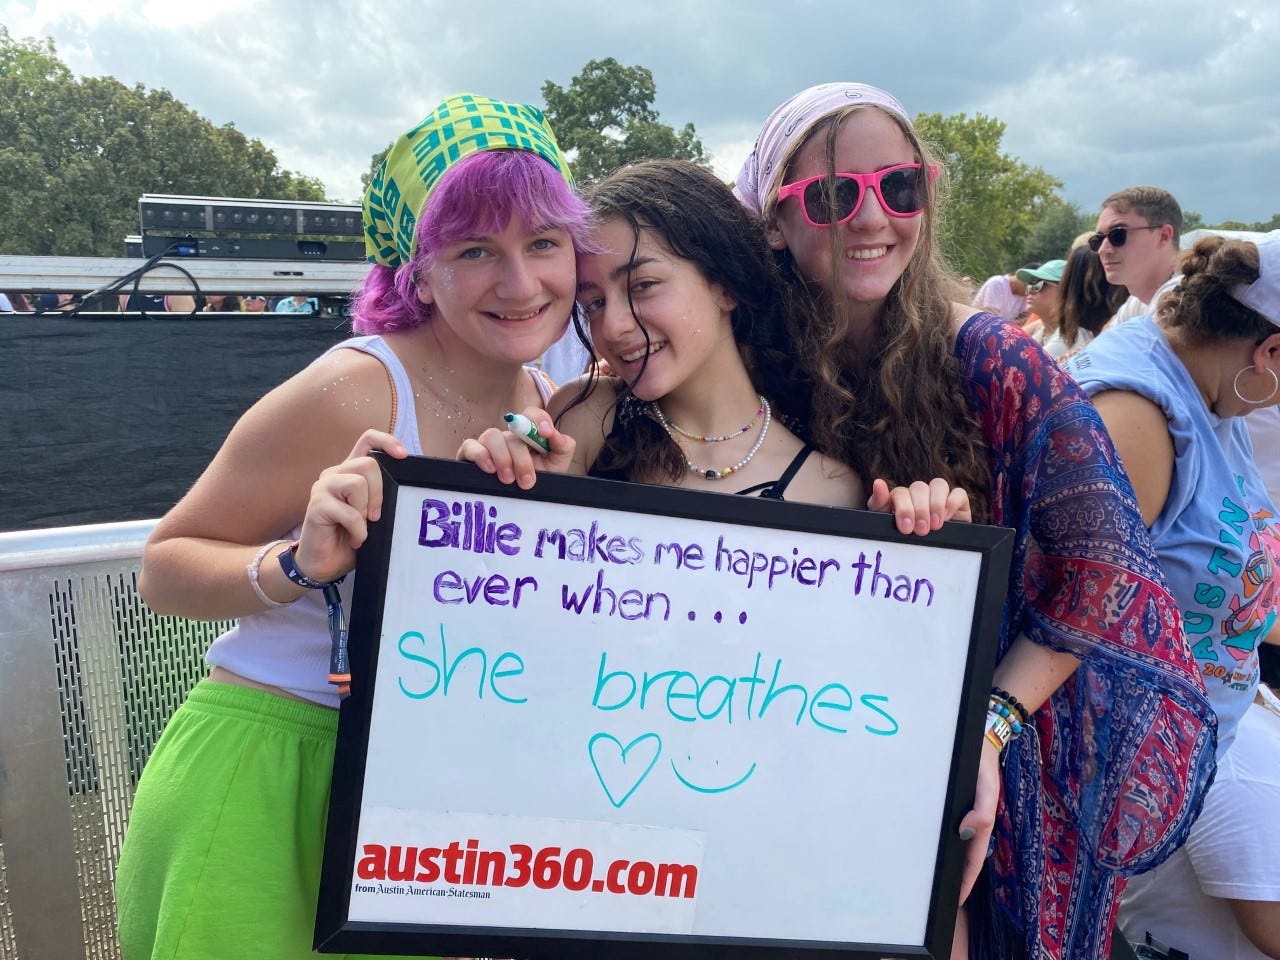 Andi Cannon, 15, left, Kate Johnson, 15, middle, and Rayna Syrett, 16, waiting for the Billie Eilish show on Saturday Oct. 2, 2021. All three are from Austin, Texas.